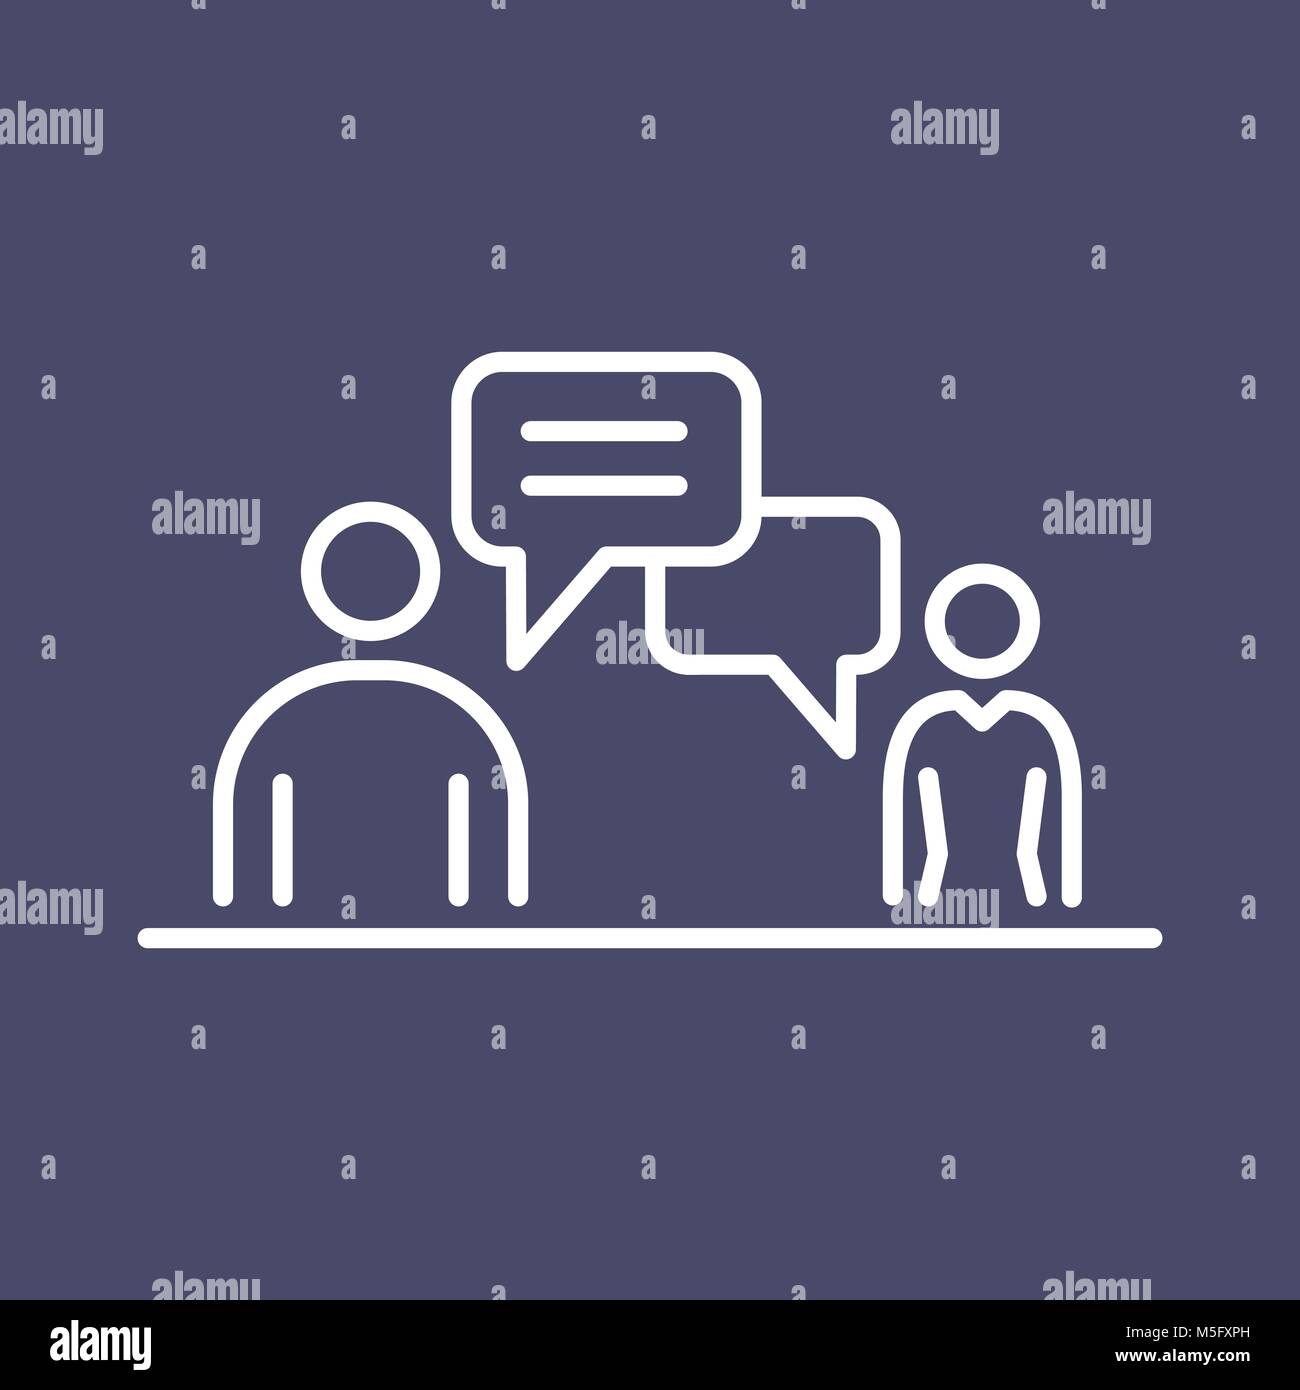 Meeting conversation business people icon simple line flat illustration. Stock Vector